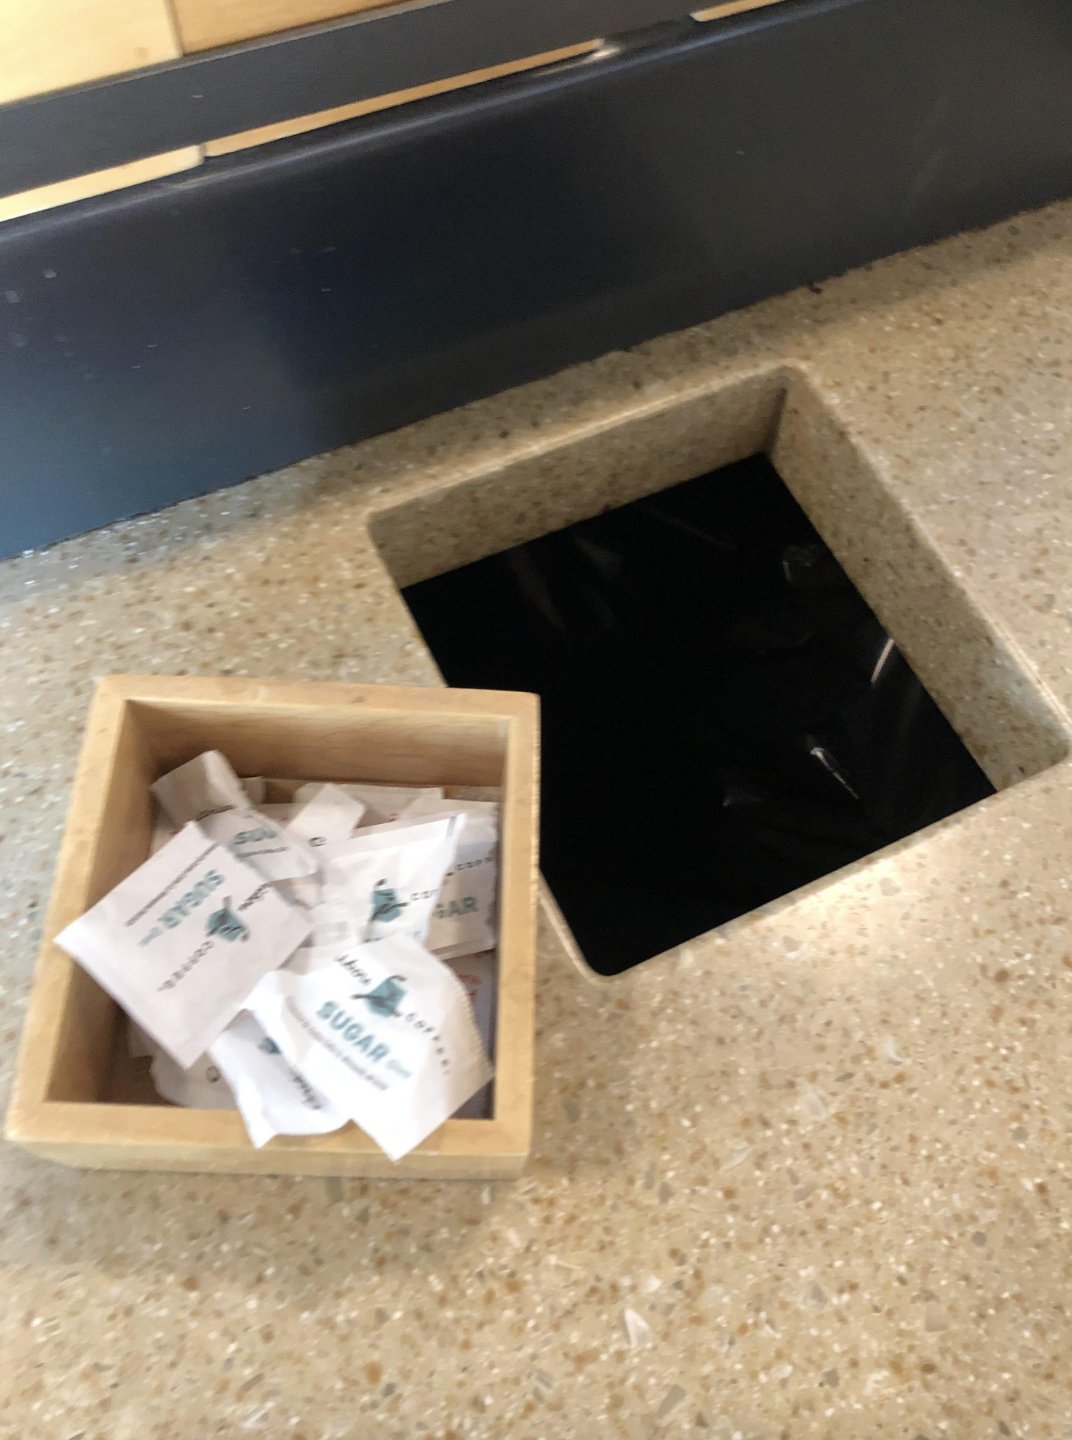 A napkin holder filled with empty sugar packets